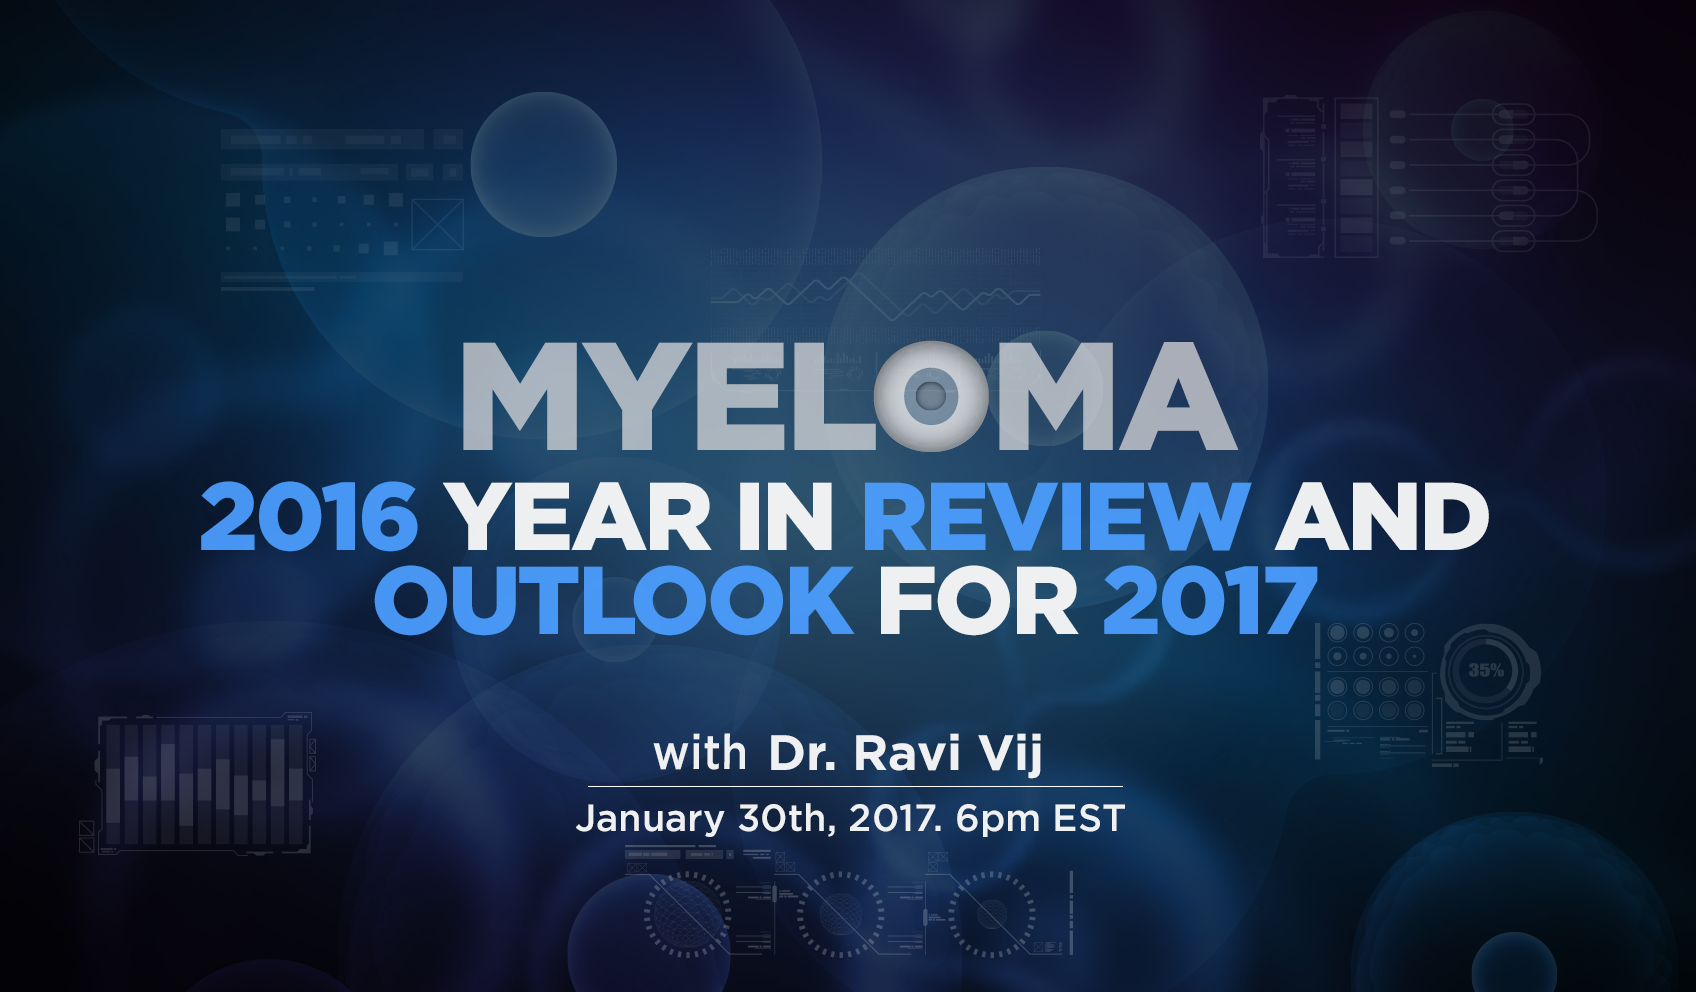 Myeloma: 2016 Year in Review and Outlook for 2017